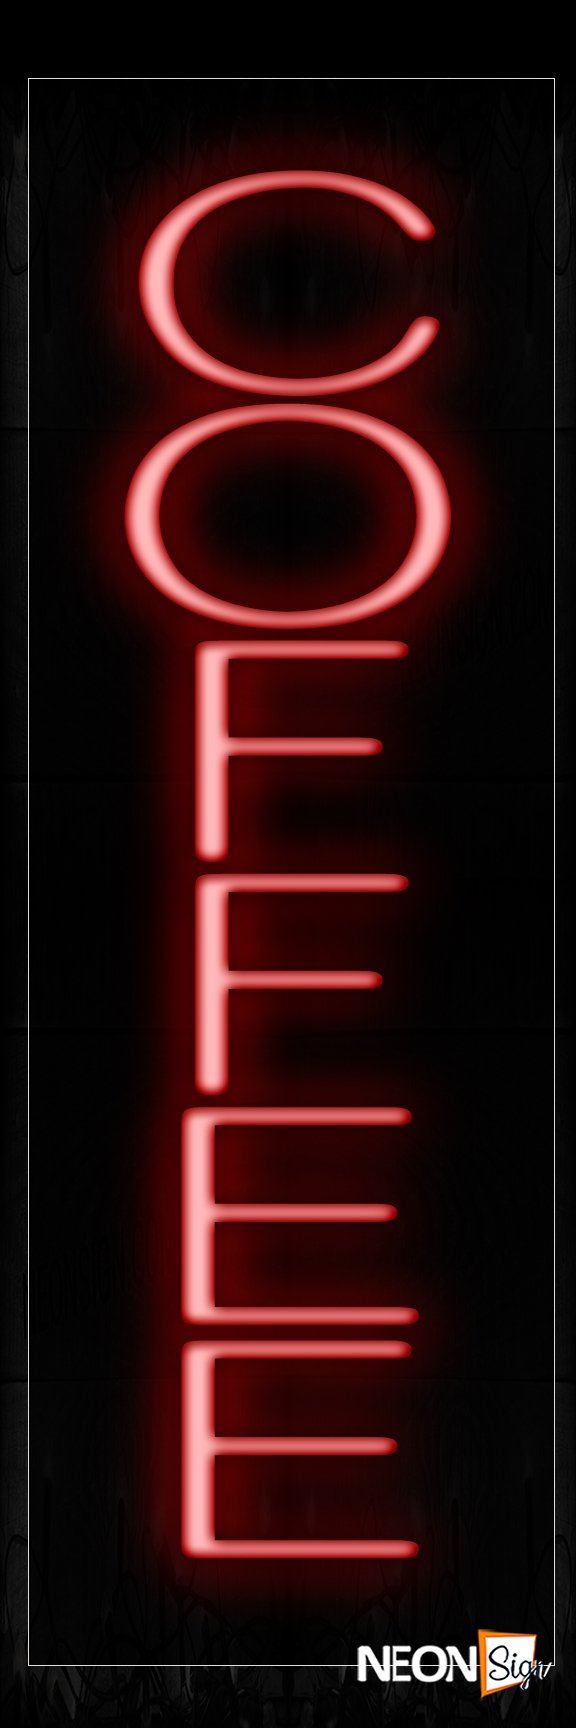 Image of 12216 Coffee Neon Signs_8x24 Black Backing